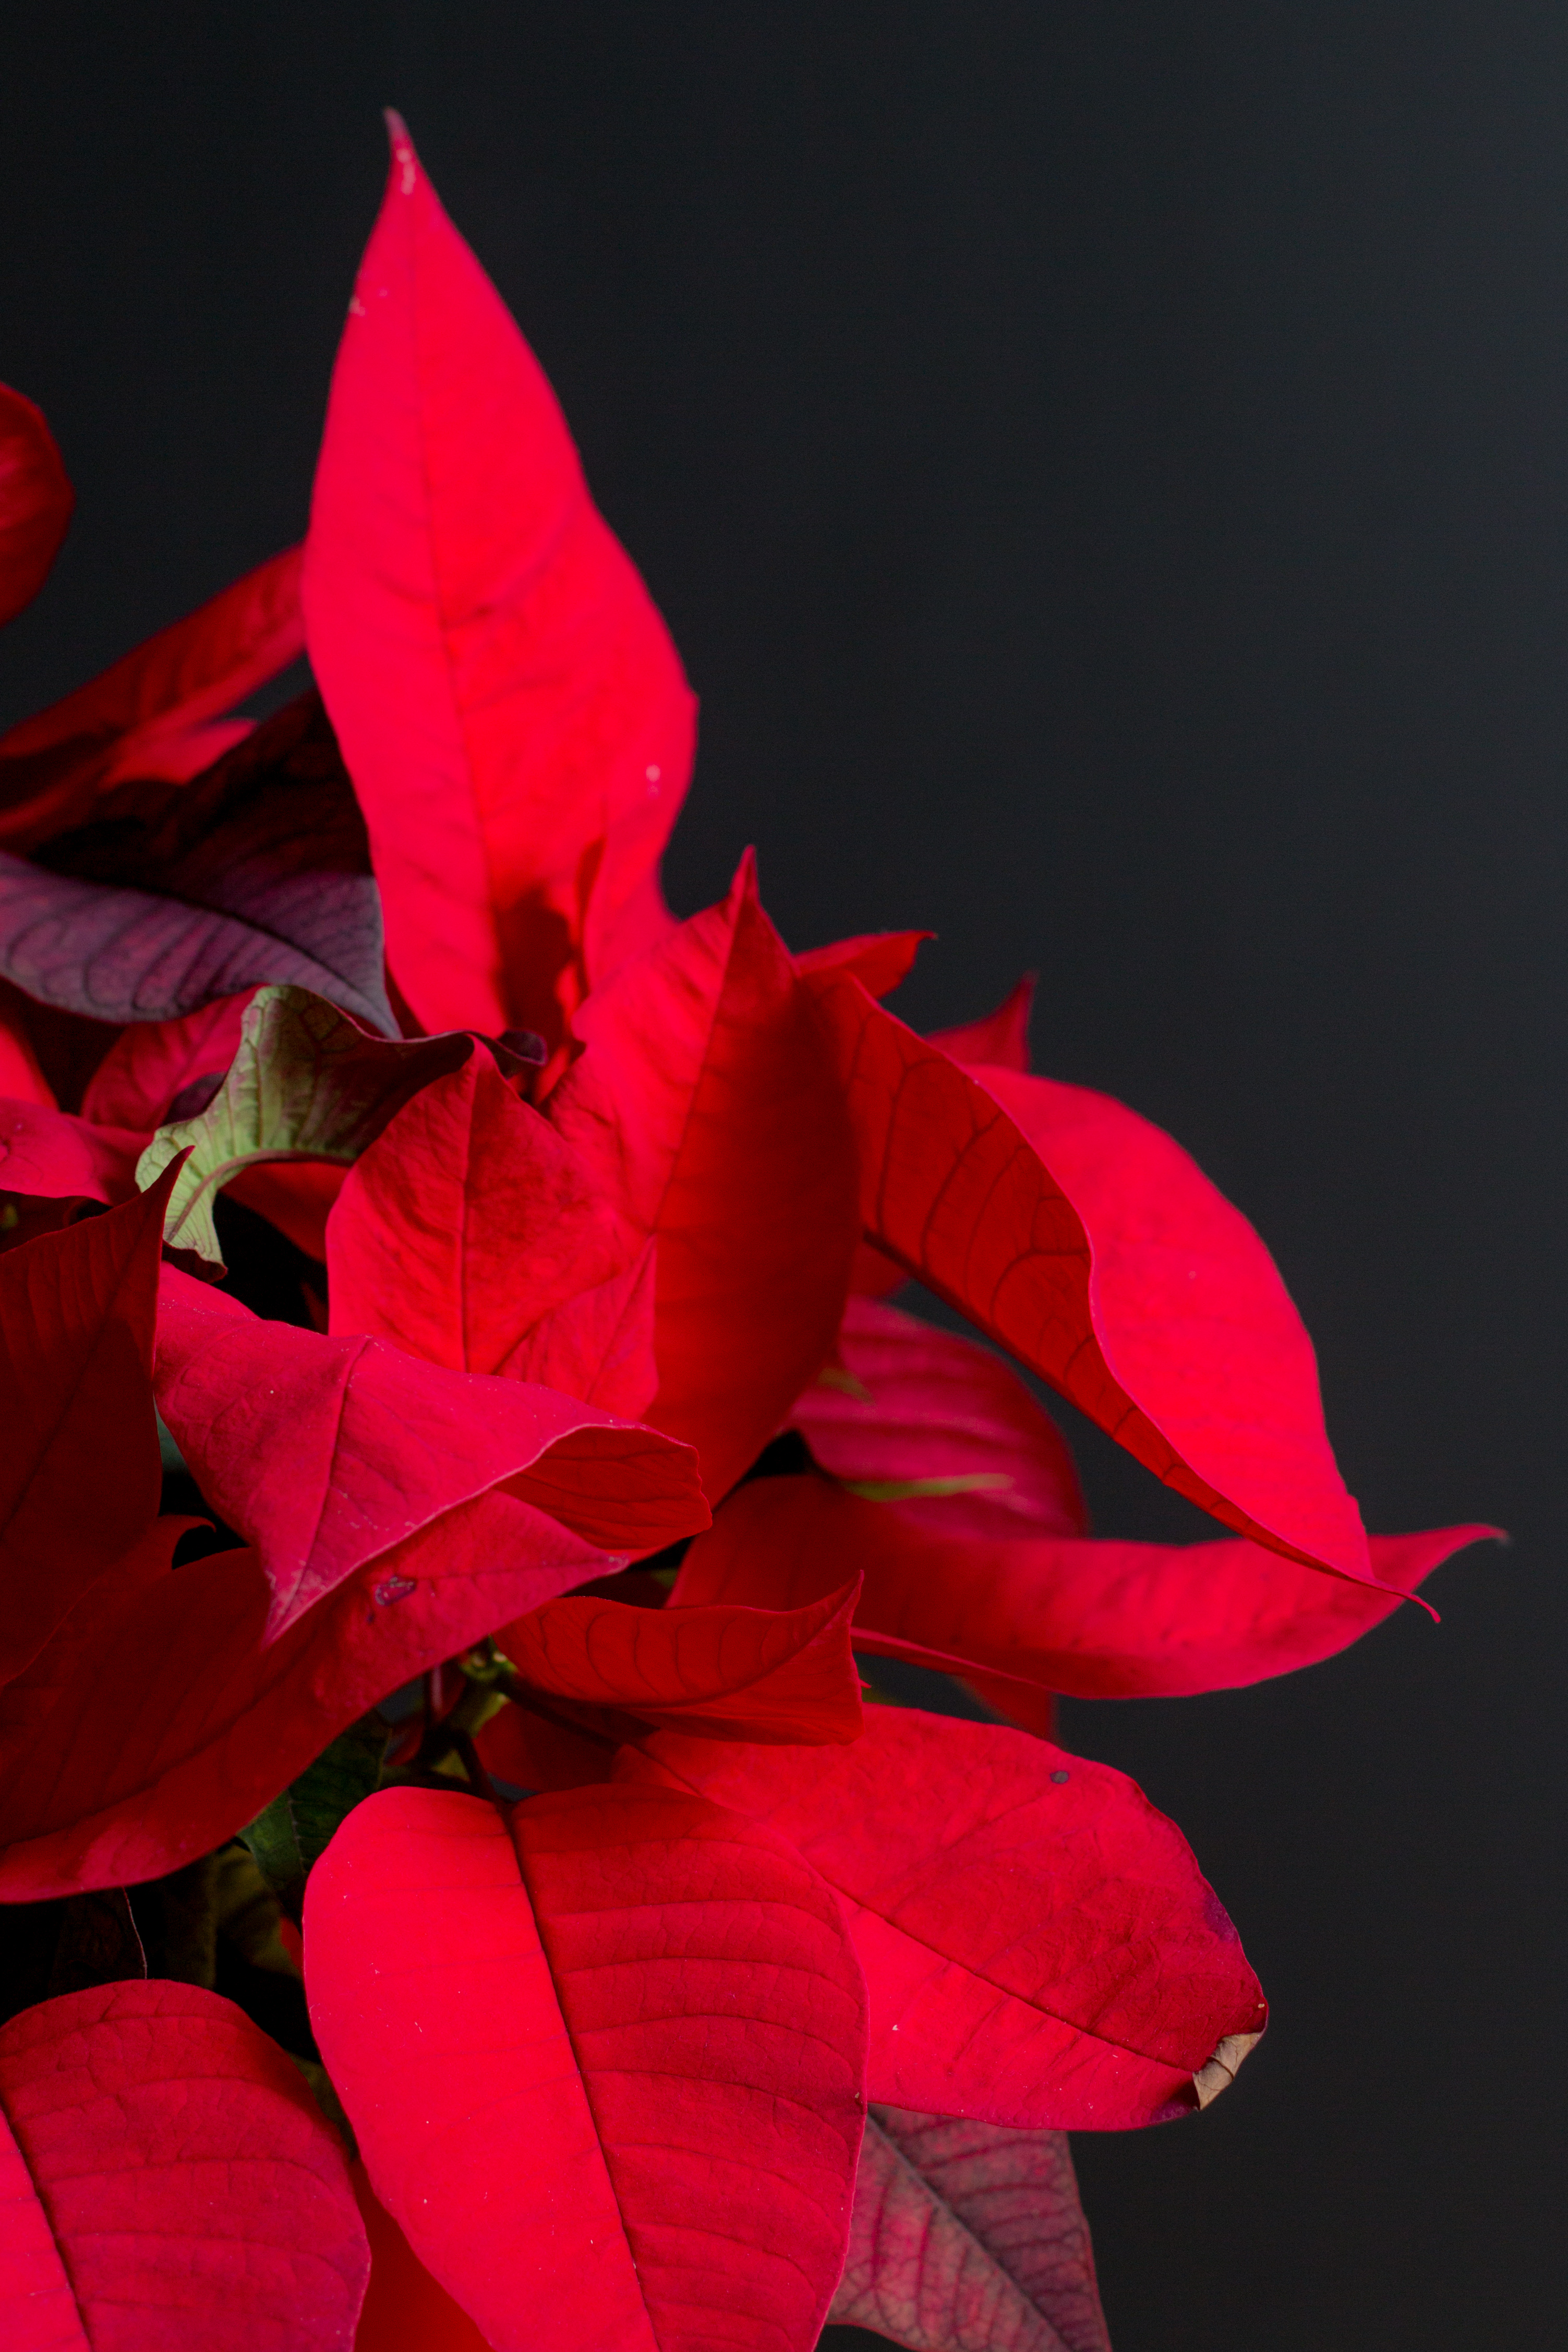 leaves, red, plant, macro, bright, poinsettia, exotic